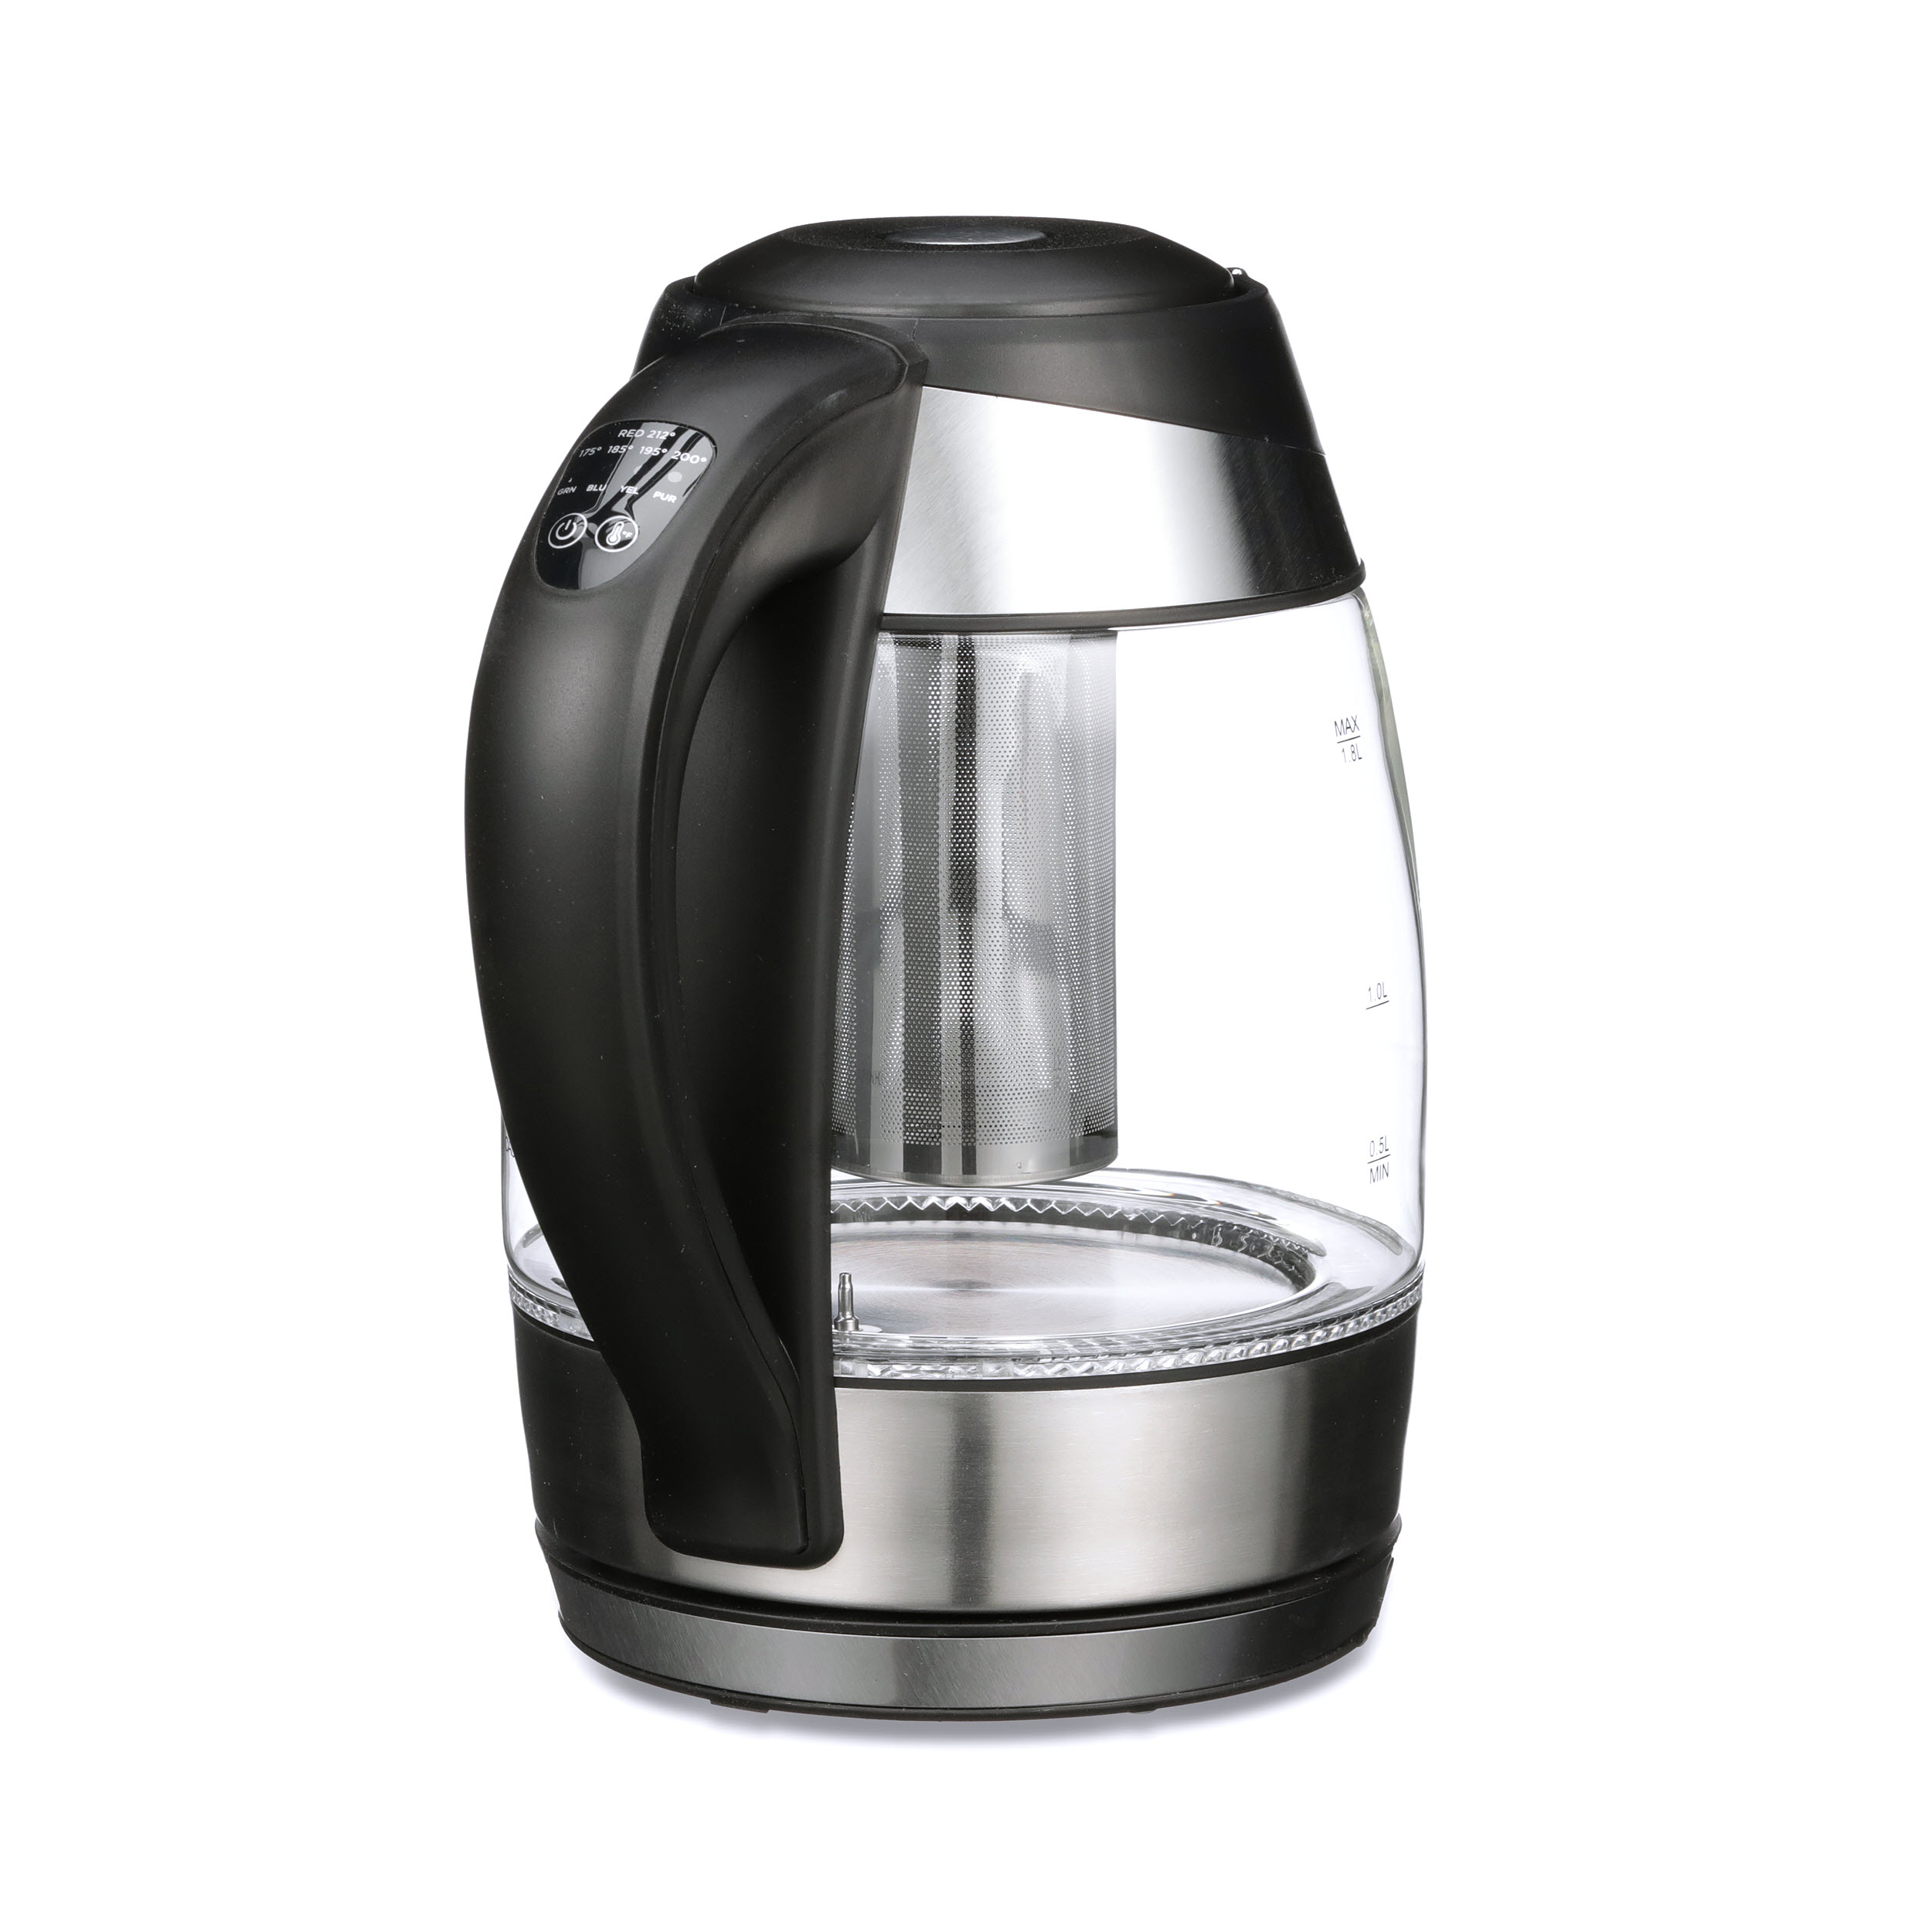 Chefman Electric Glass Kettle - Silver/Black, 1.8 L - Fry's Food Stores